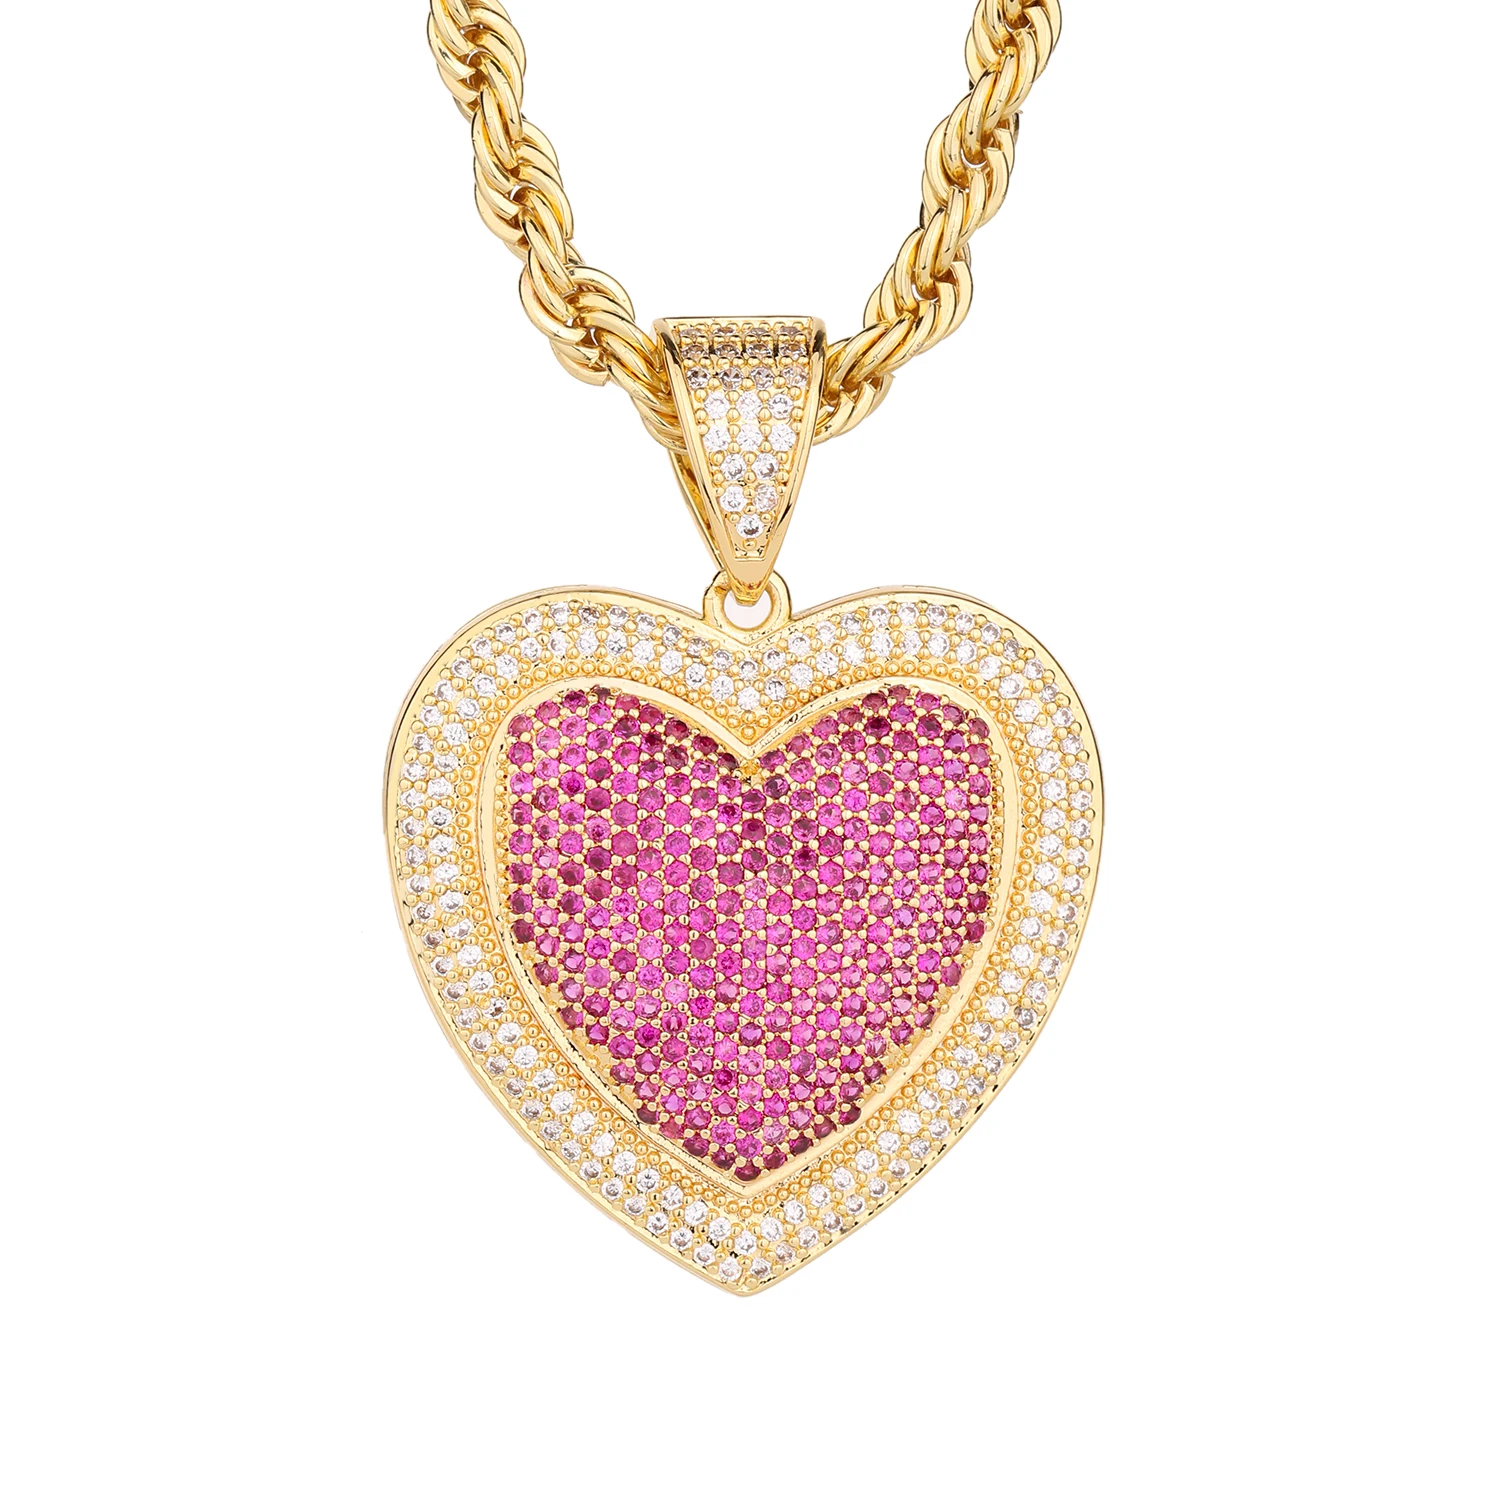 

Pink Heart shaped Pendant Necklace, New Fashion Sweet Love Necklace, Essential Gift for Girlfriends